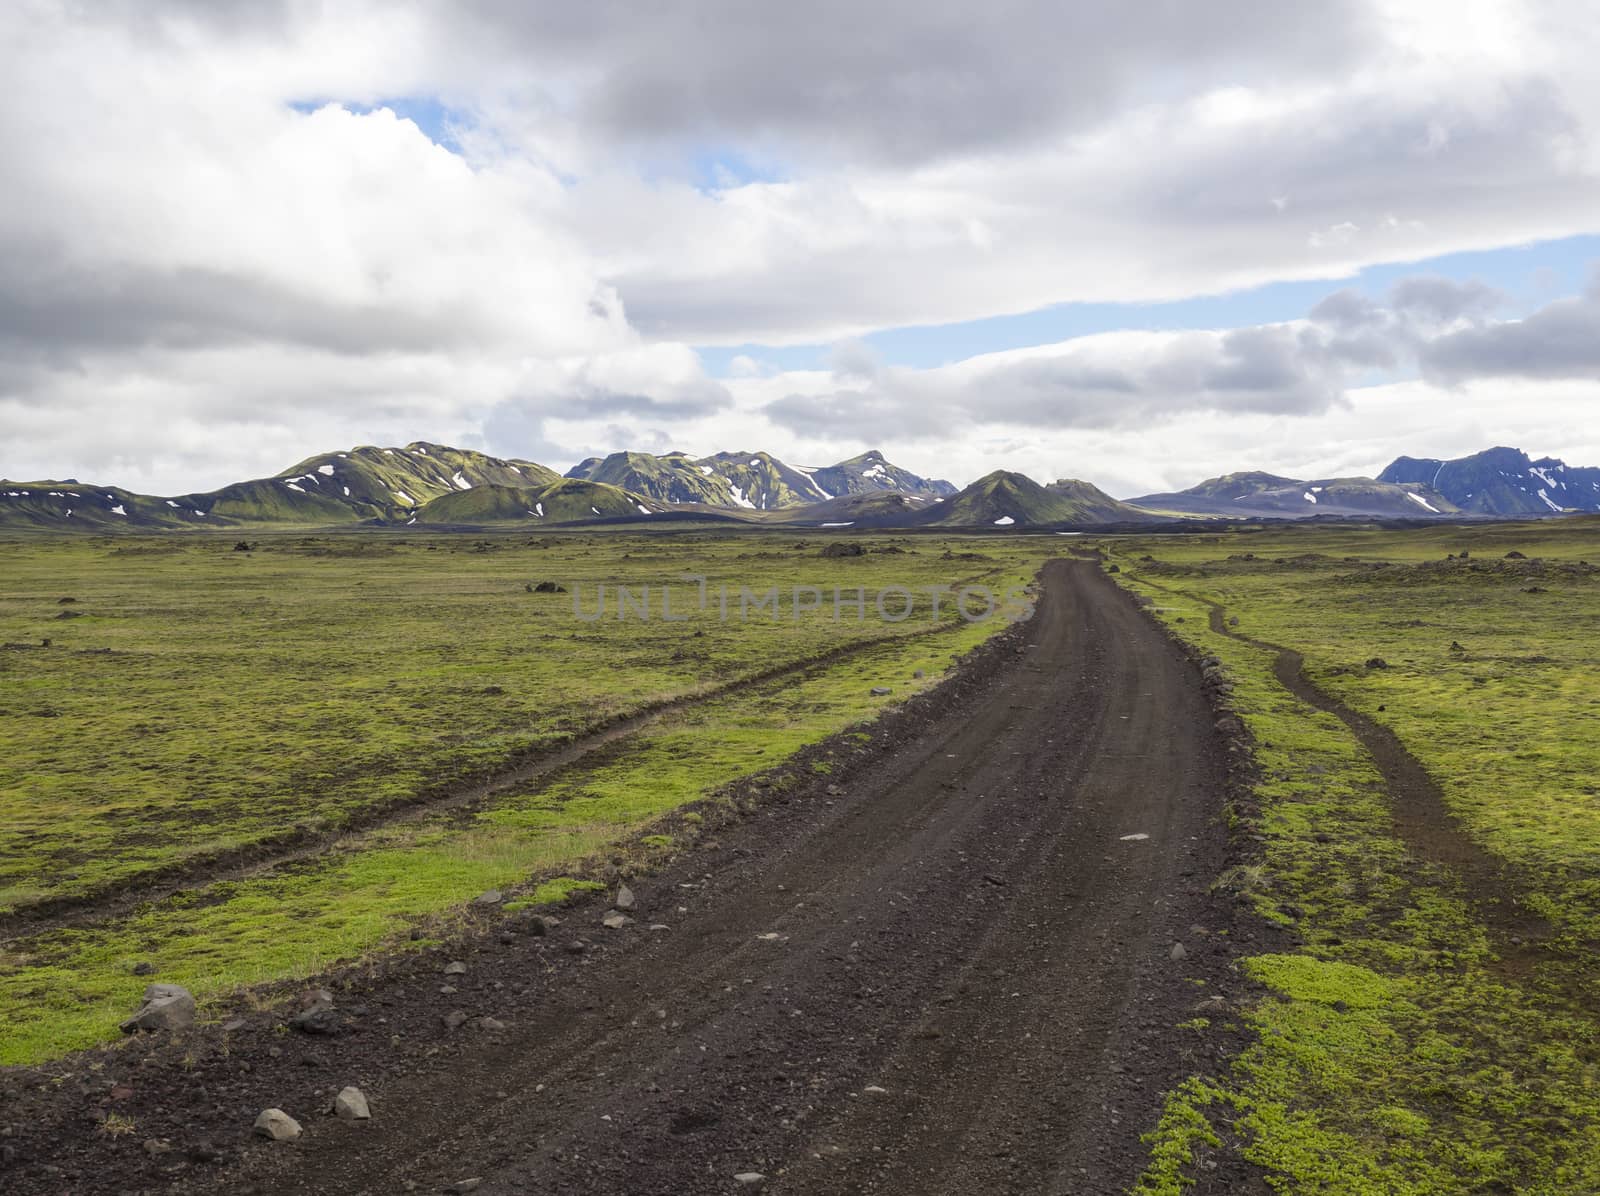 view on dirt mountain road F210 in abandoned green landscape at Nature reserve Fjallabak in Iceland with colorful snow covered rhyolit mountains, blue sky white clouds